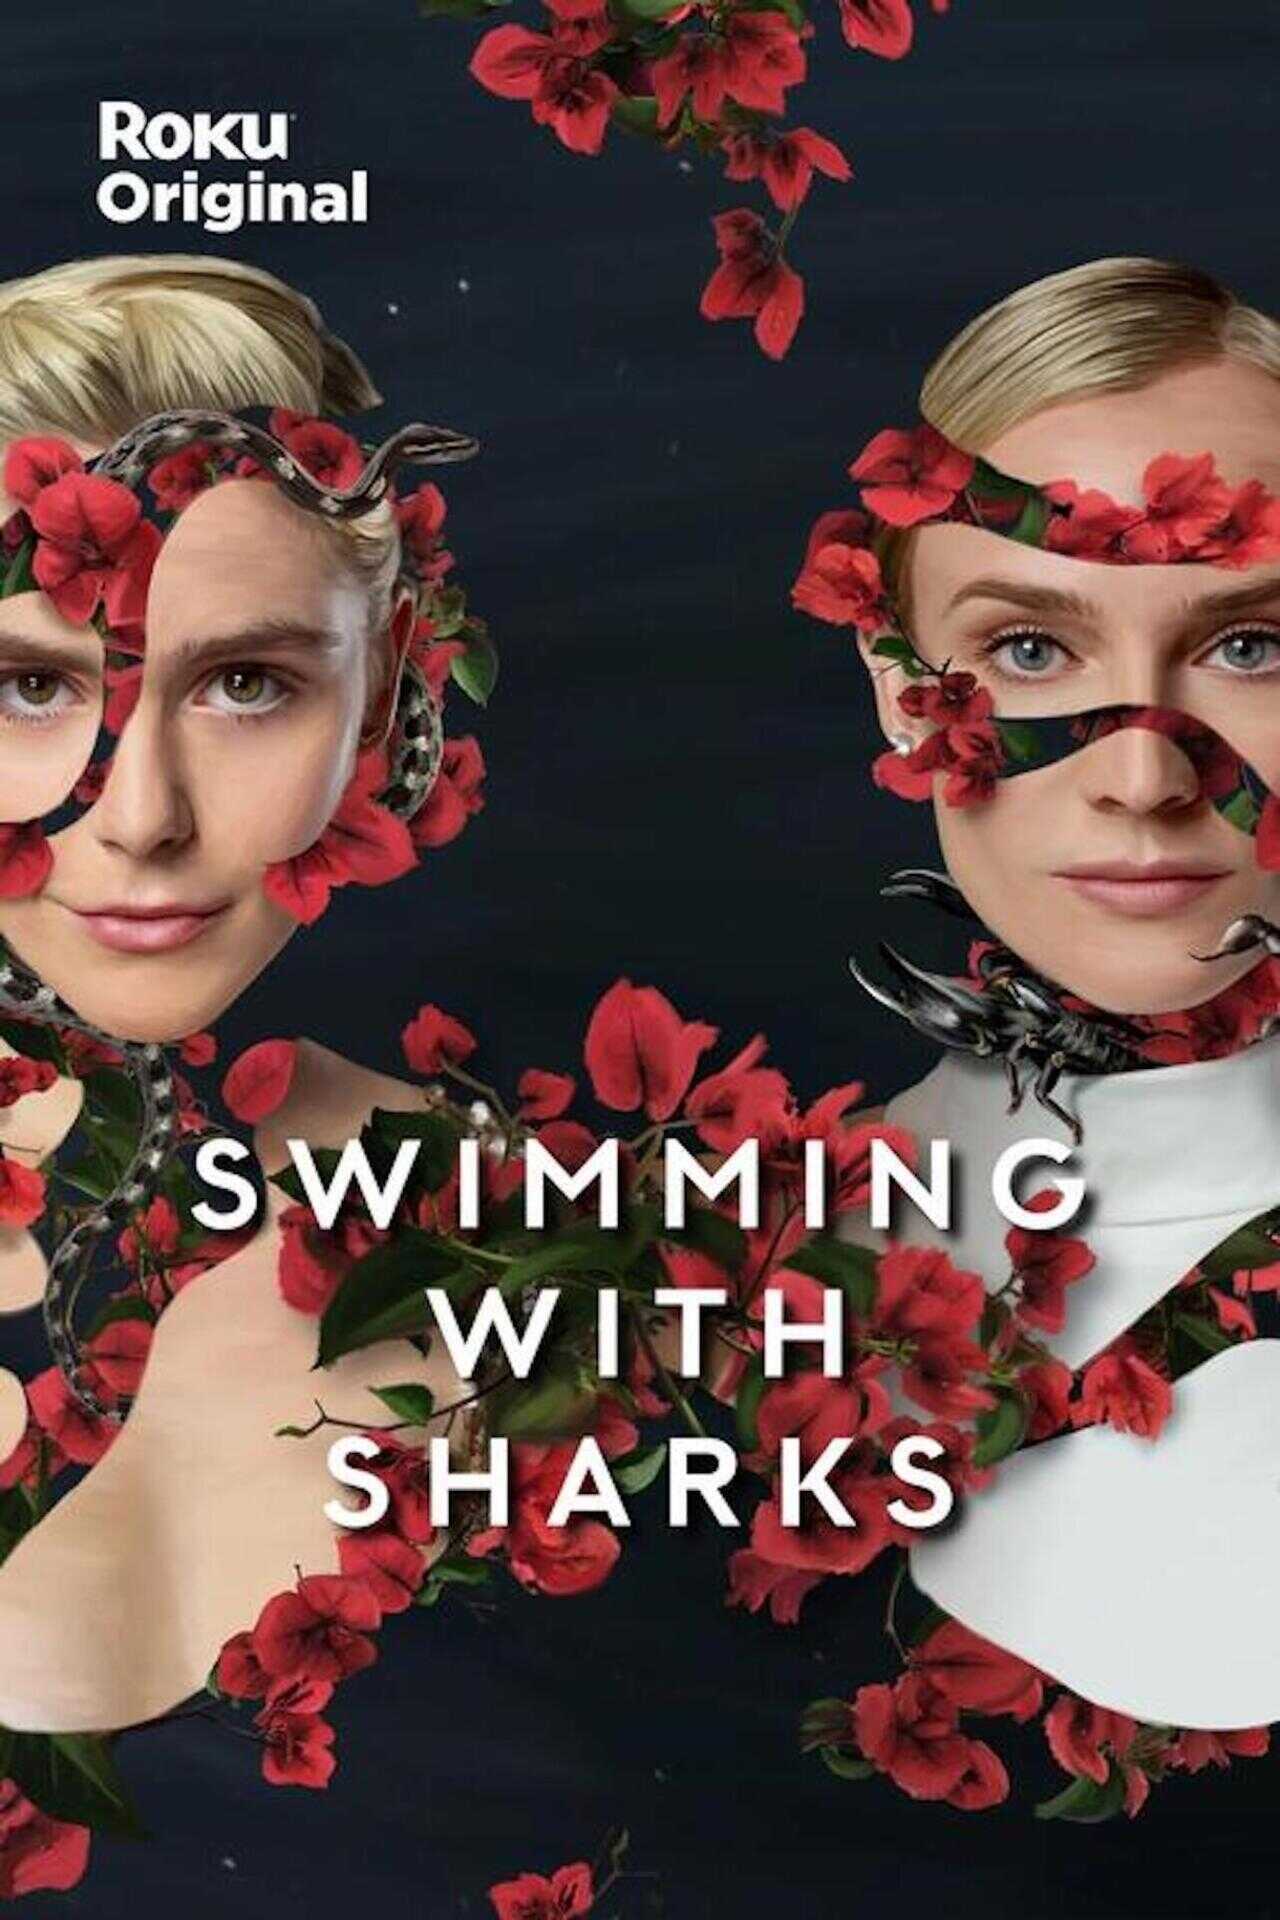 Promo image from The Roku Channel's Swimming With Sharks